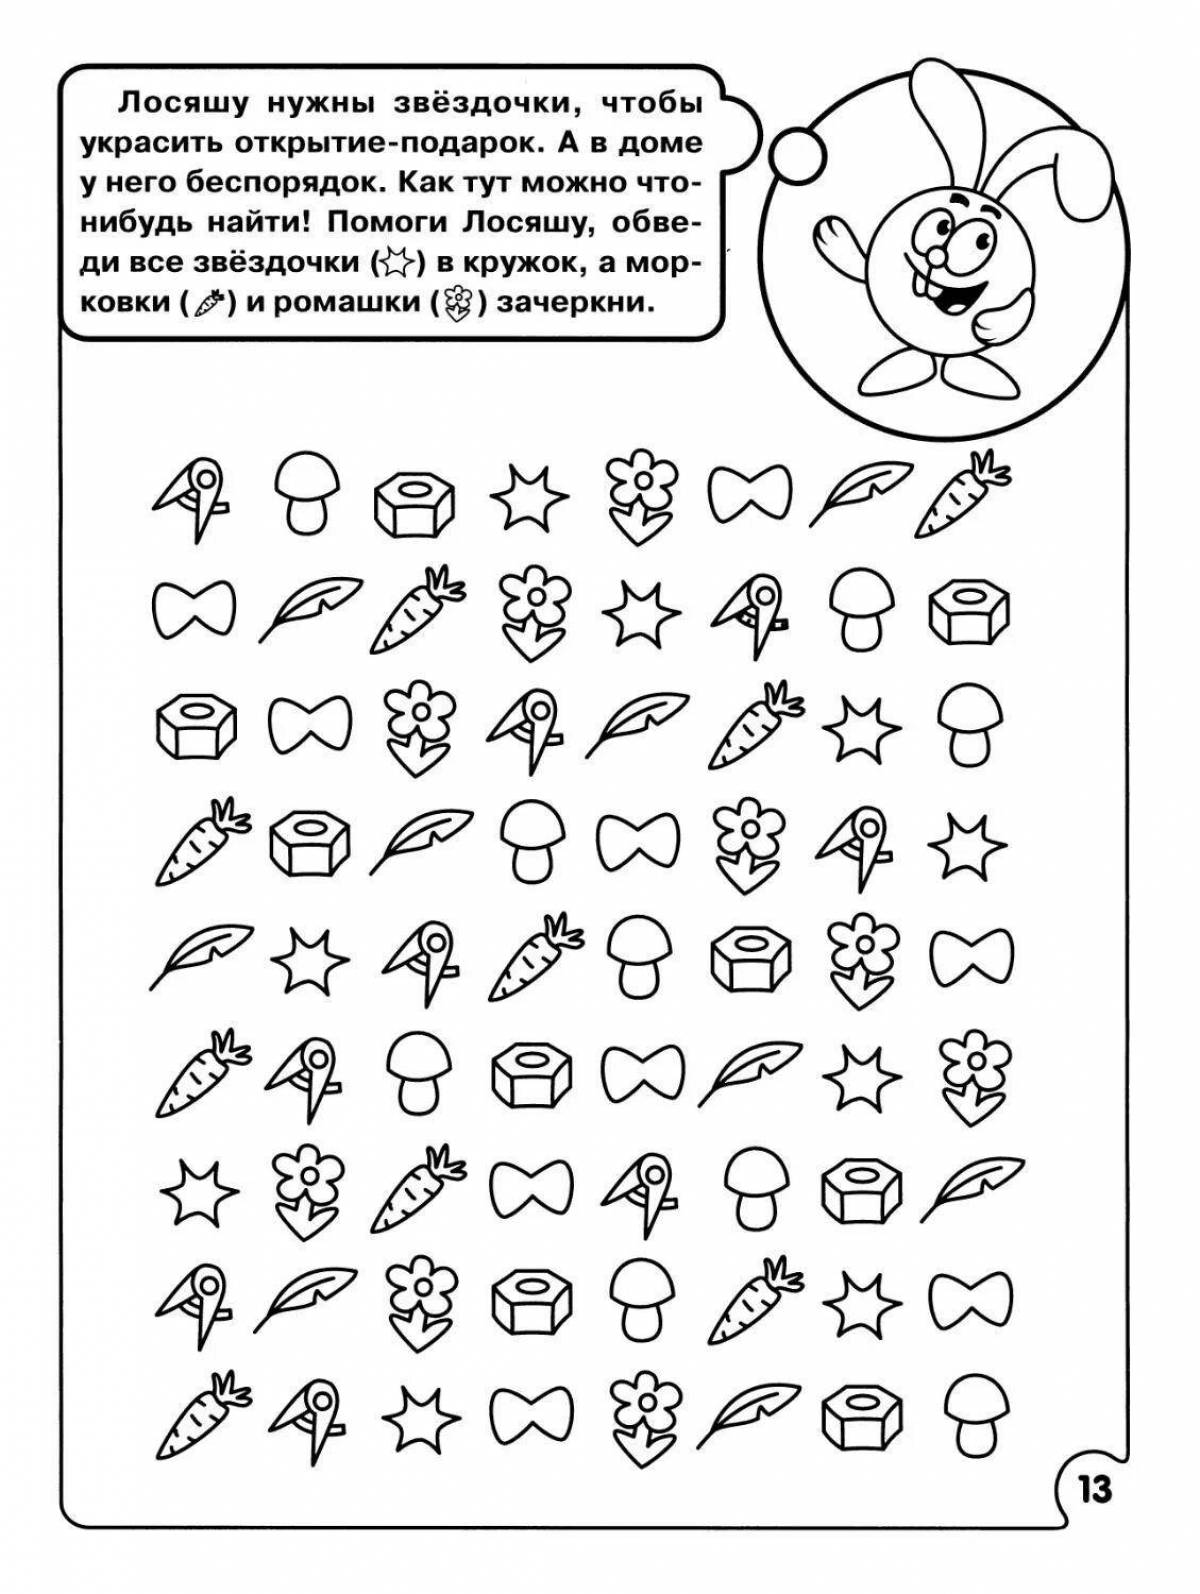 Worksheets for 5 year olds #6